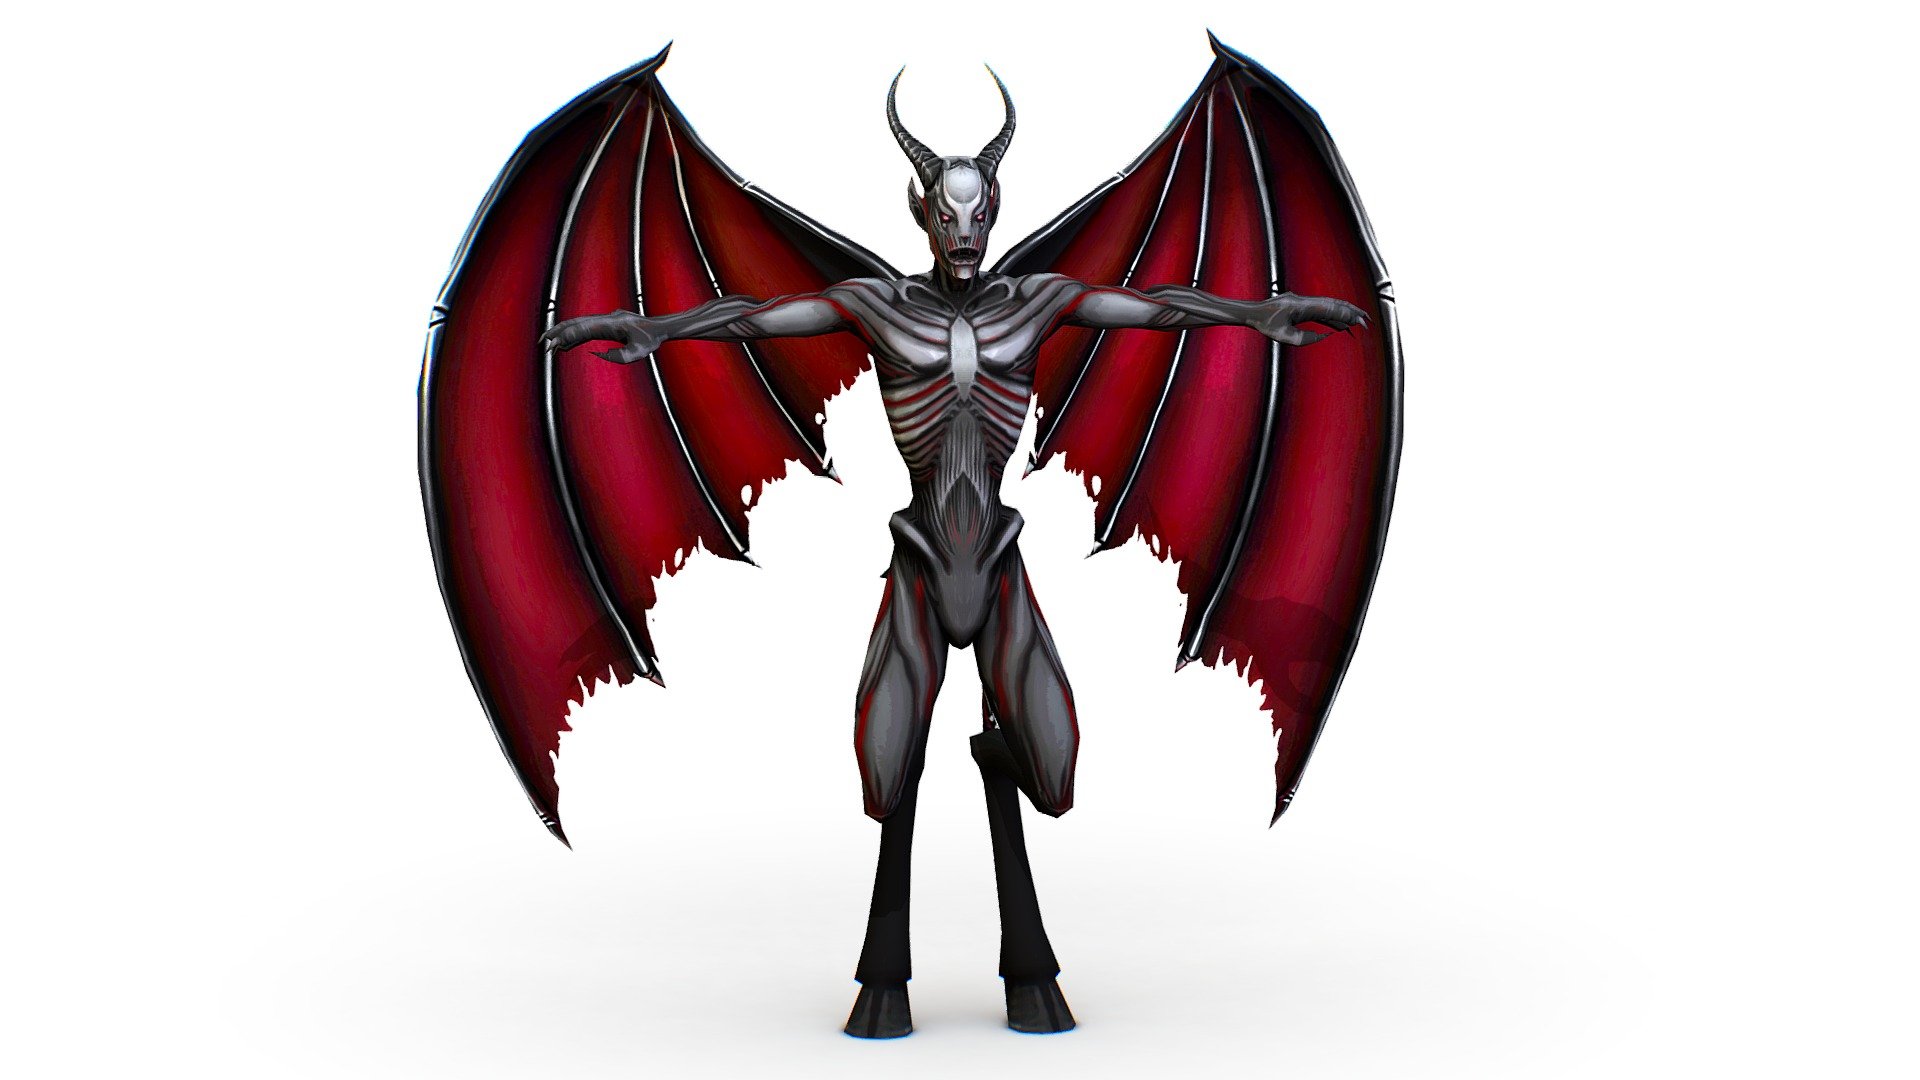 Low Poly Red Grey Demon Vampire Monster - 3dsMax and Maya file included - Texture size 2048 color map 3d model